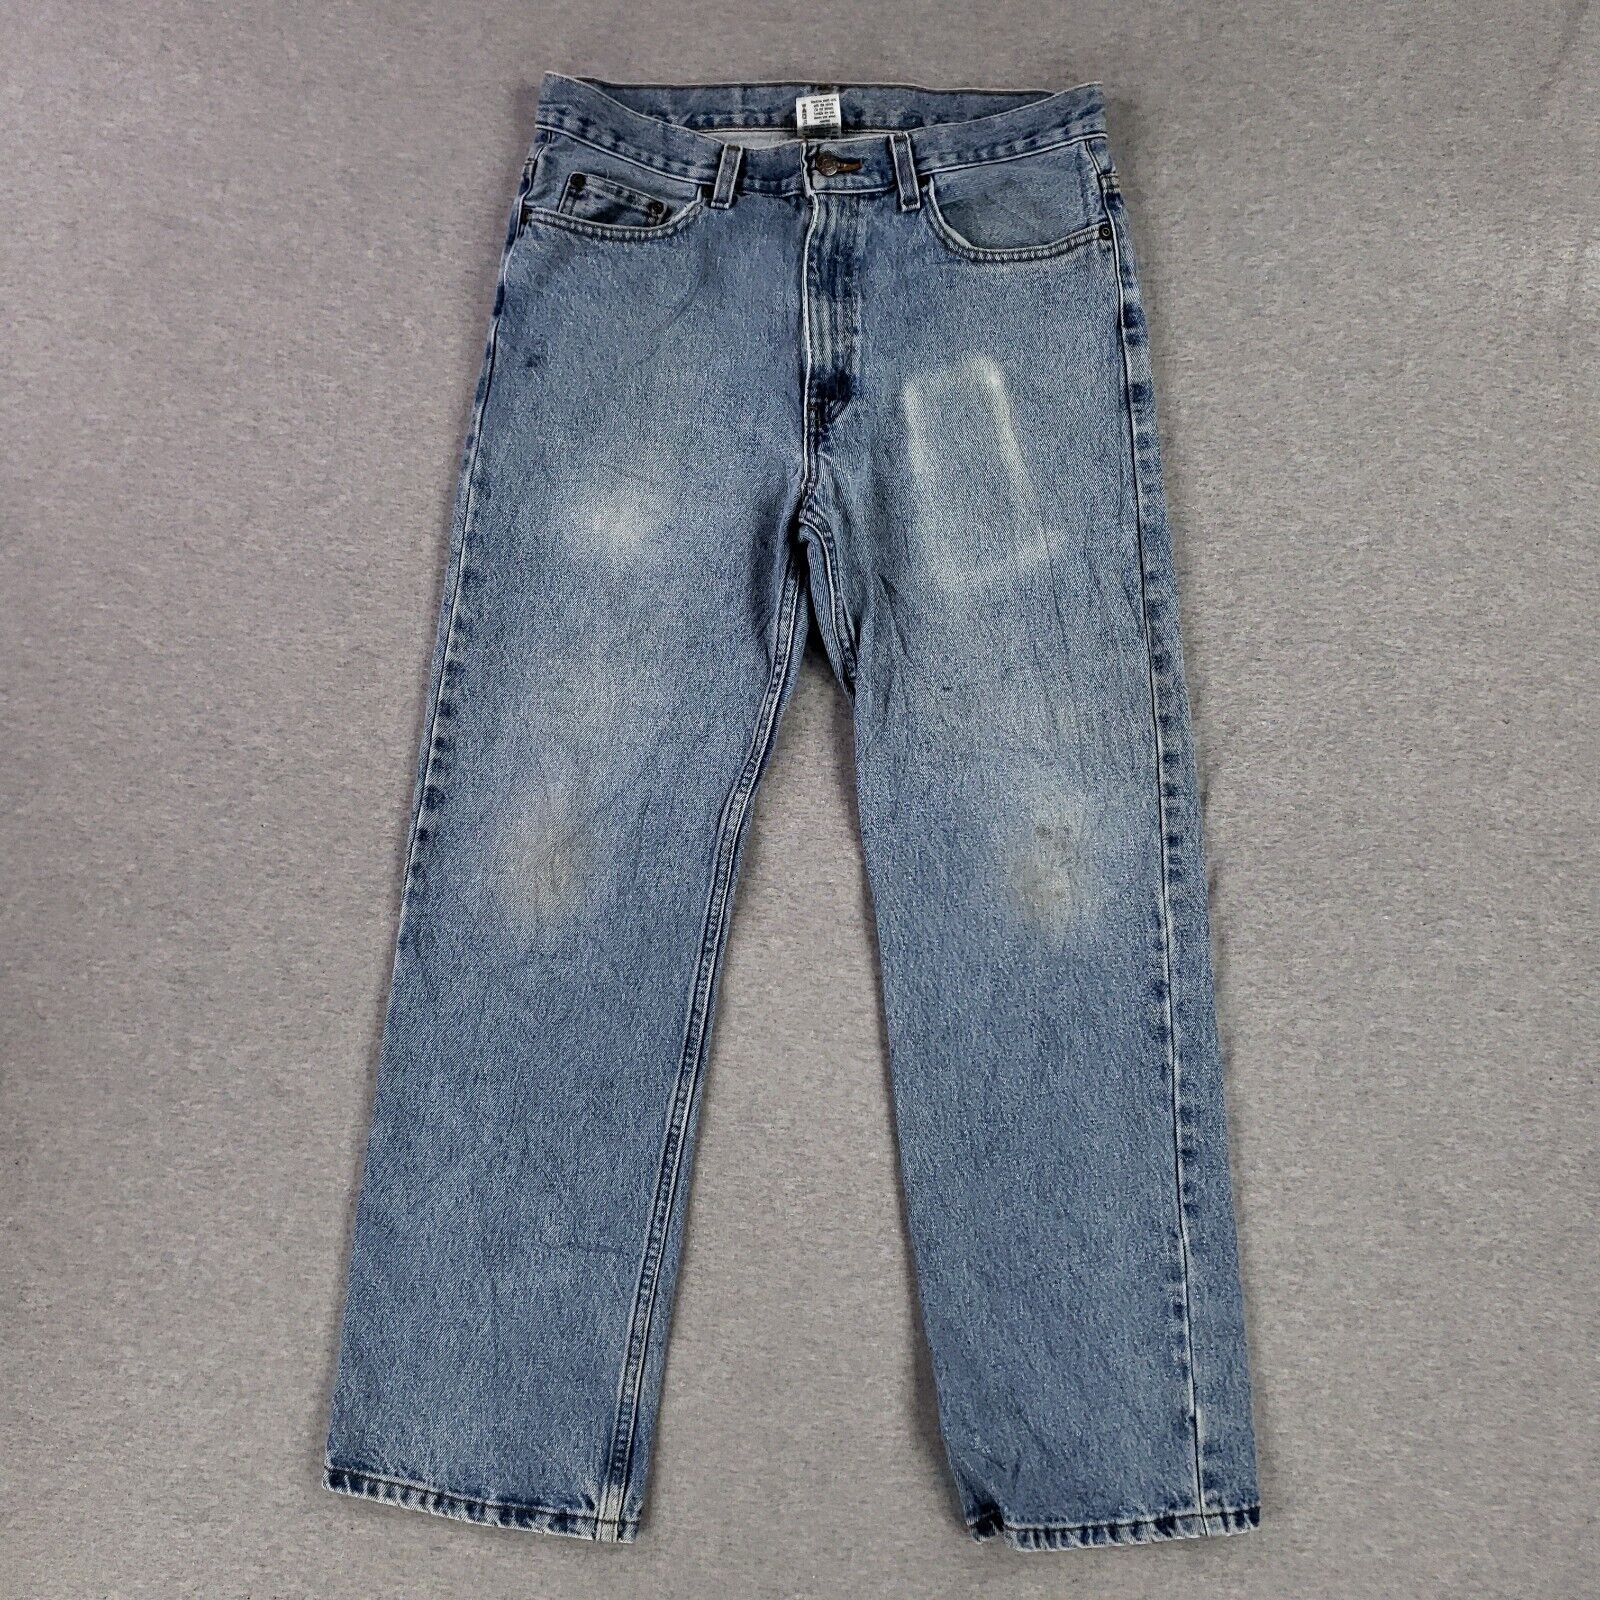 Faded Glory 32x30 Original Fit Blue Jeans Vintage Retro Old 